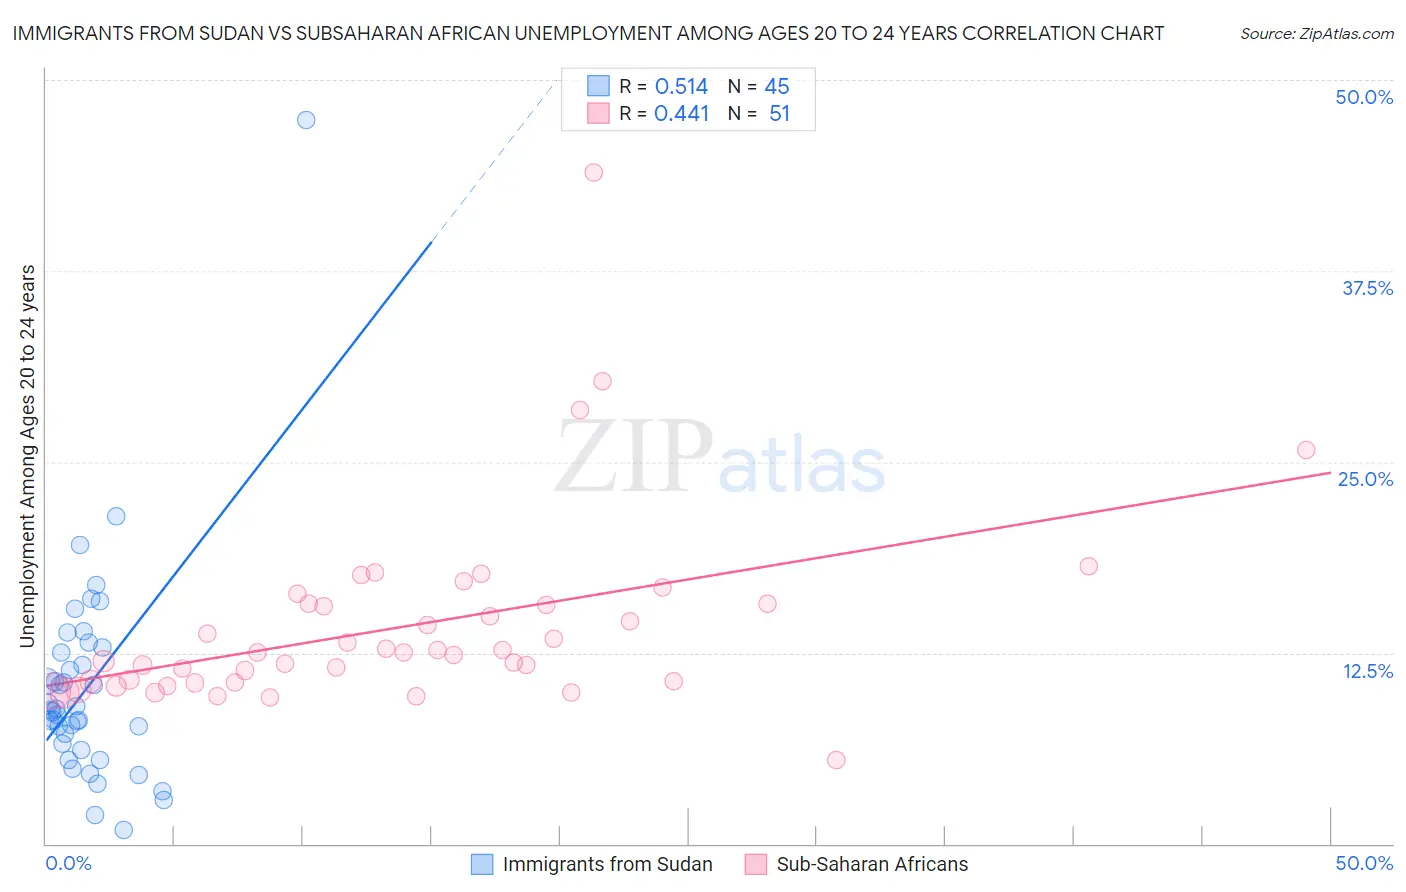 Immigrants from Sudan vs Subsaharan African Unemployment Among Ages 20 to 24 years